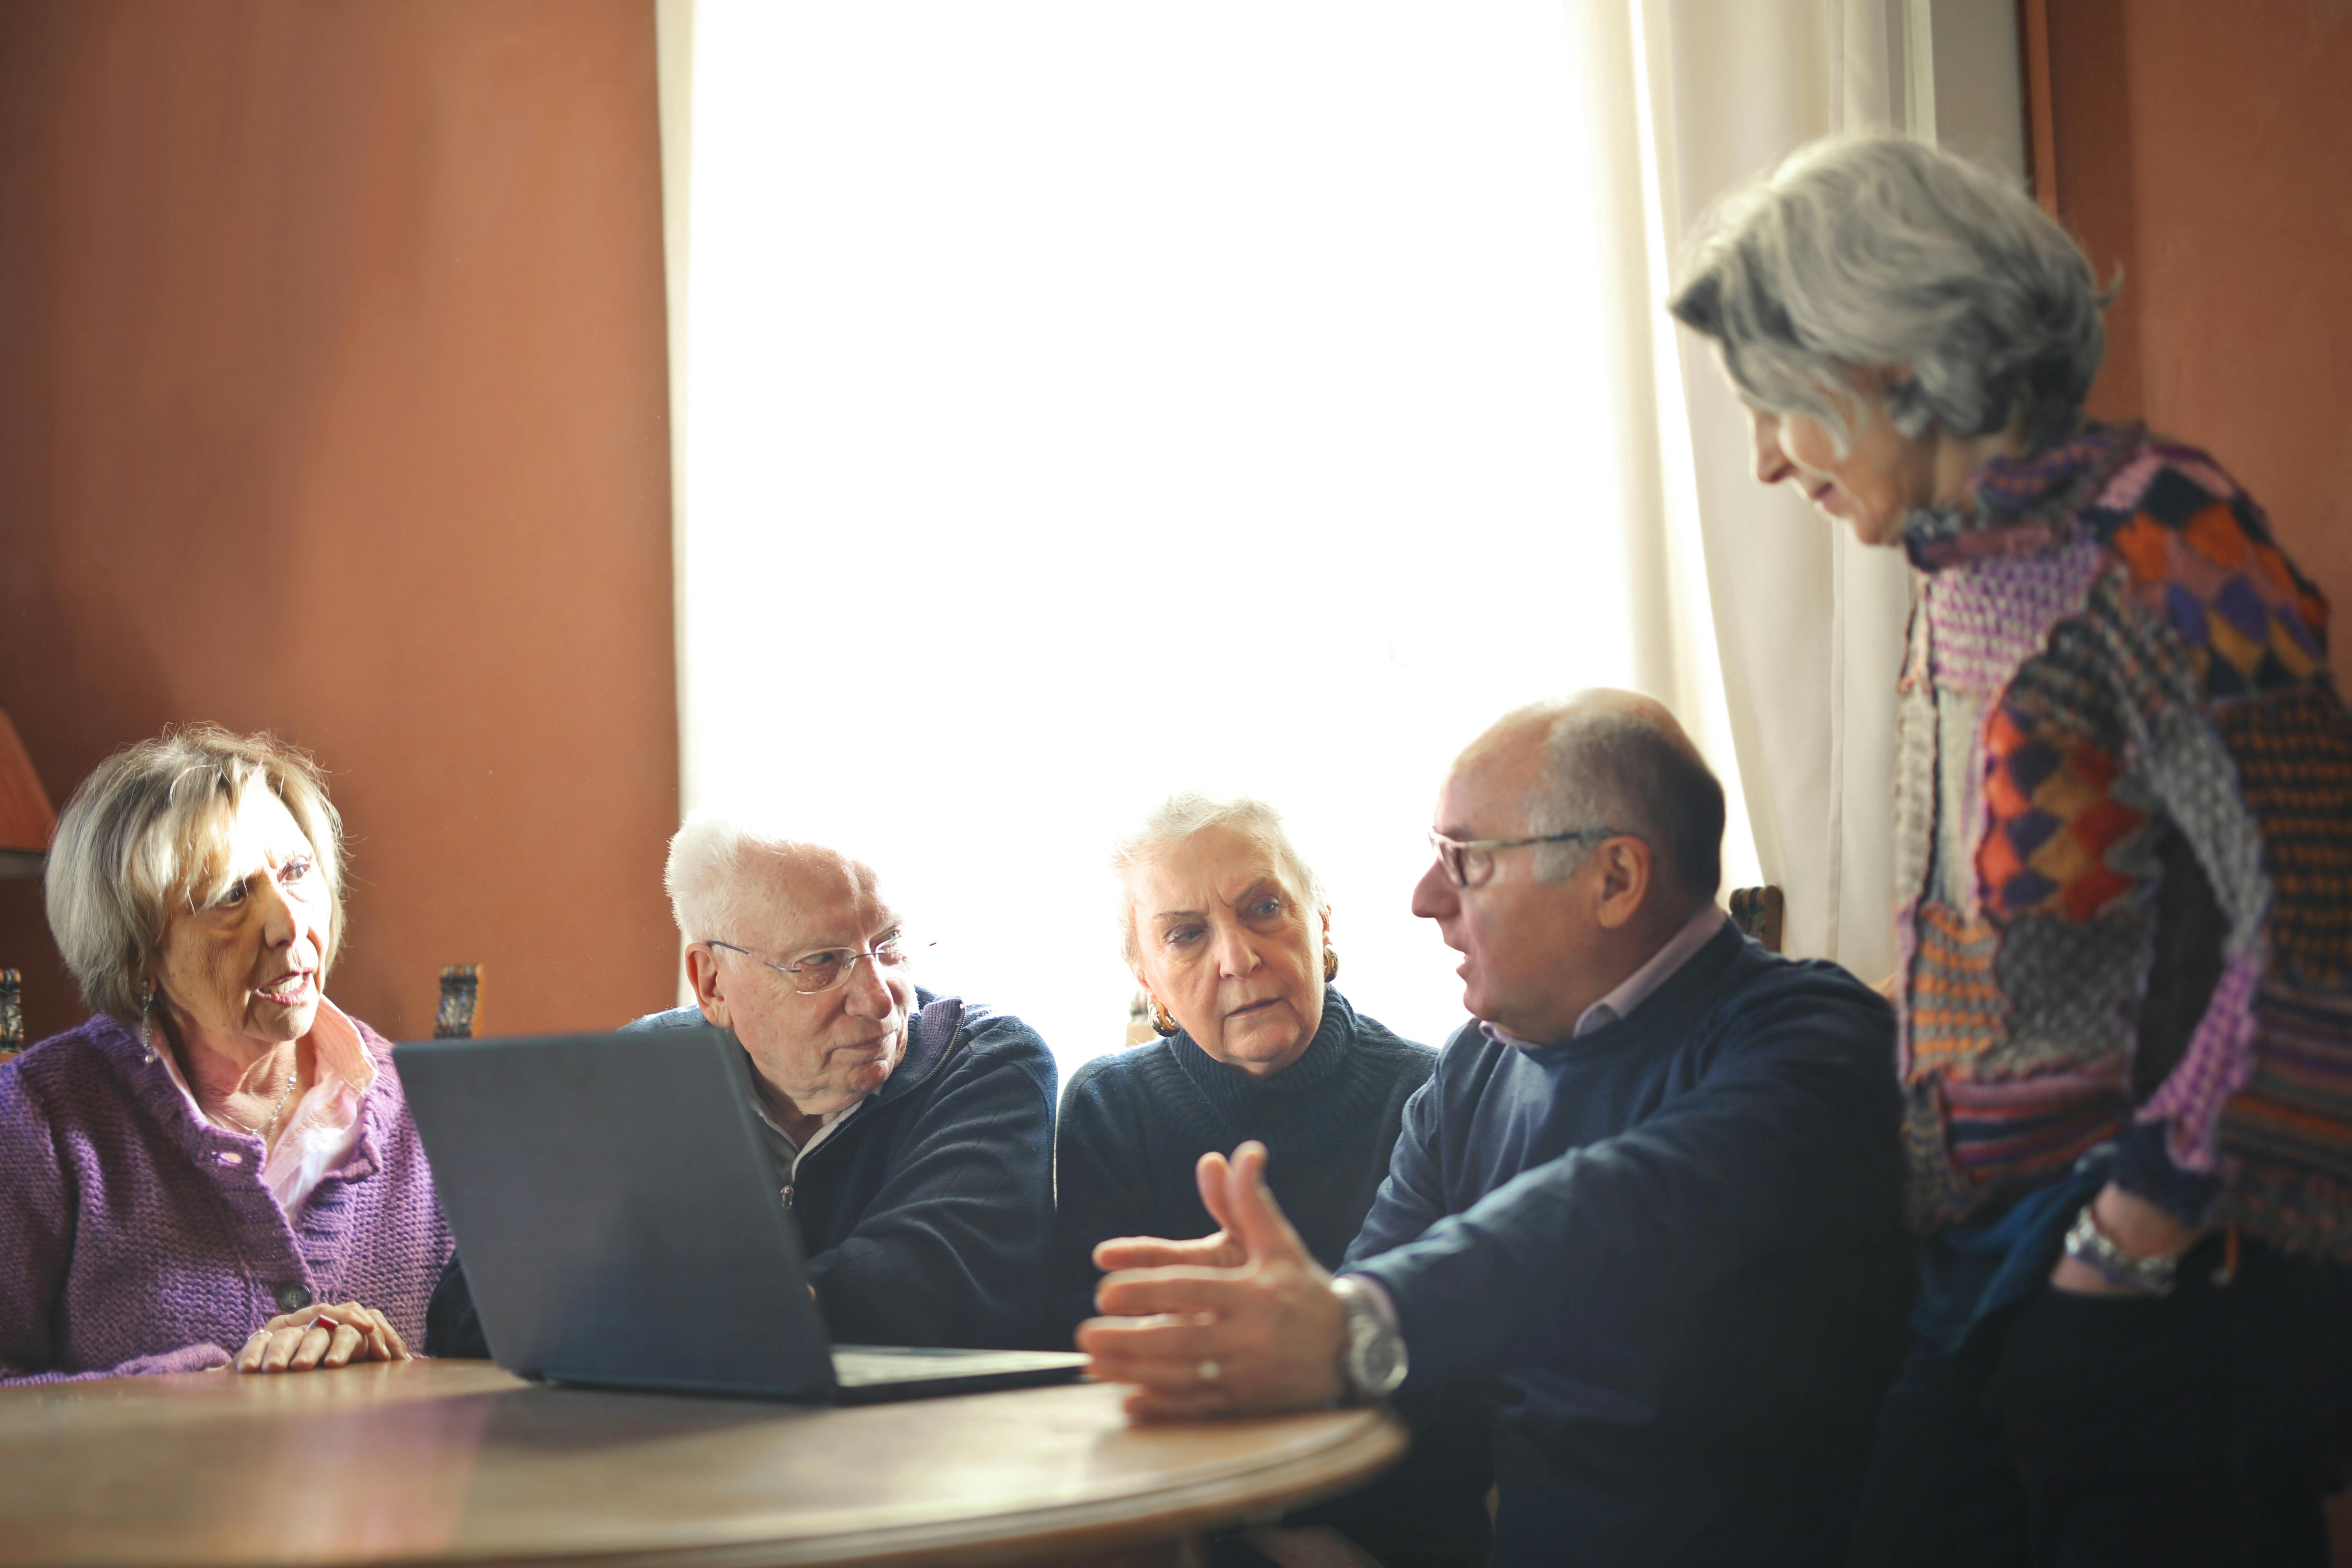 Photo showing 5 older people in conversation around a laptop